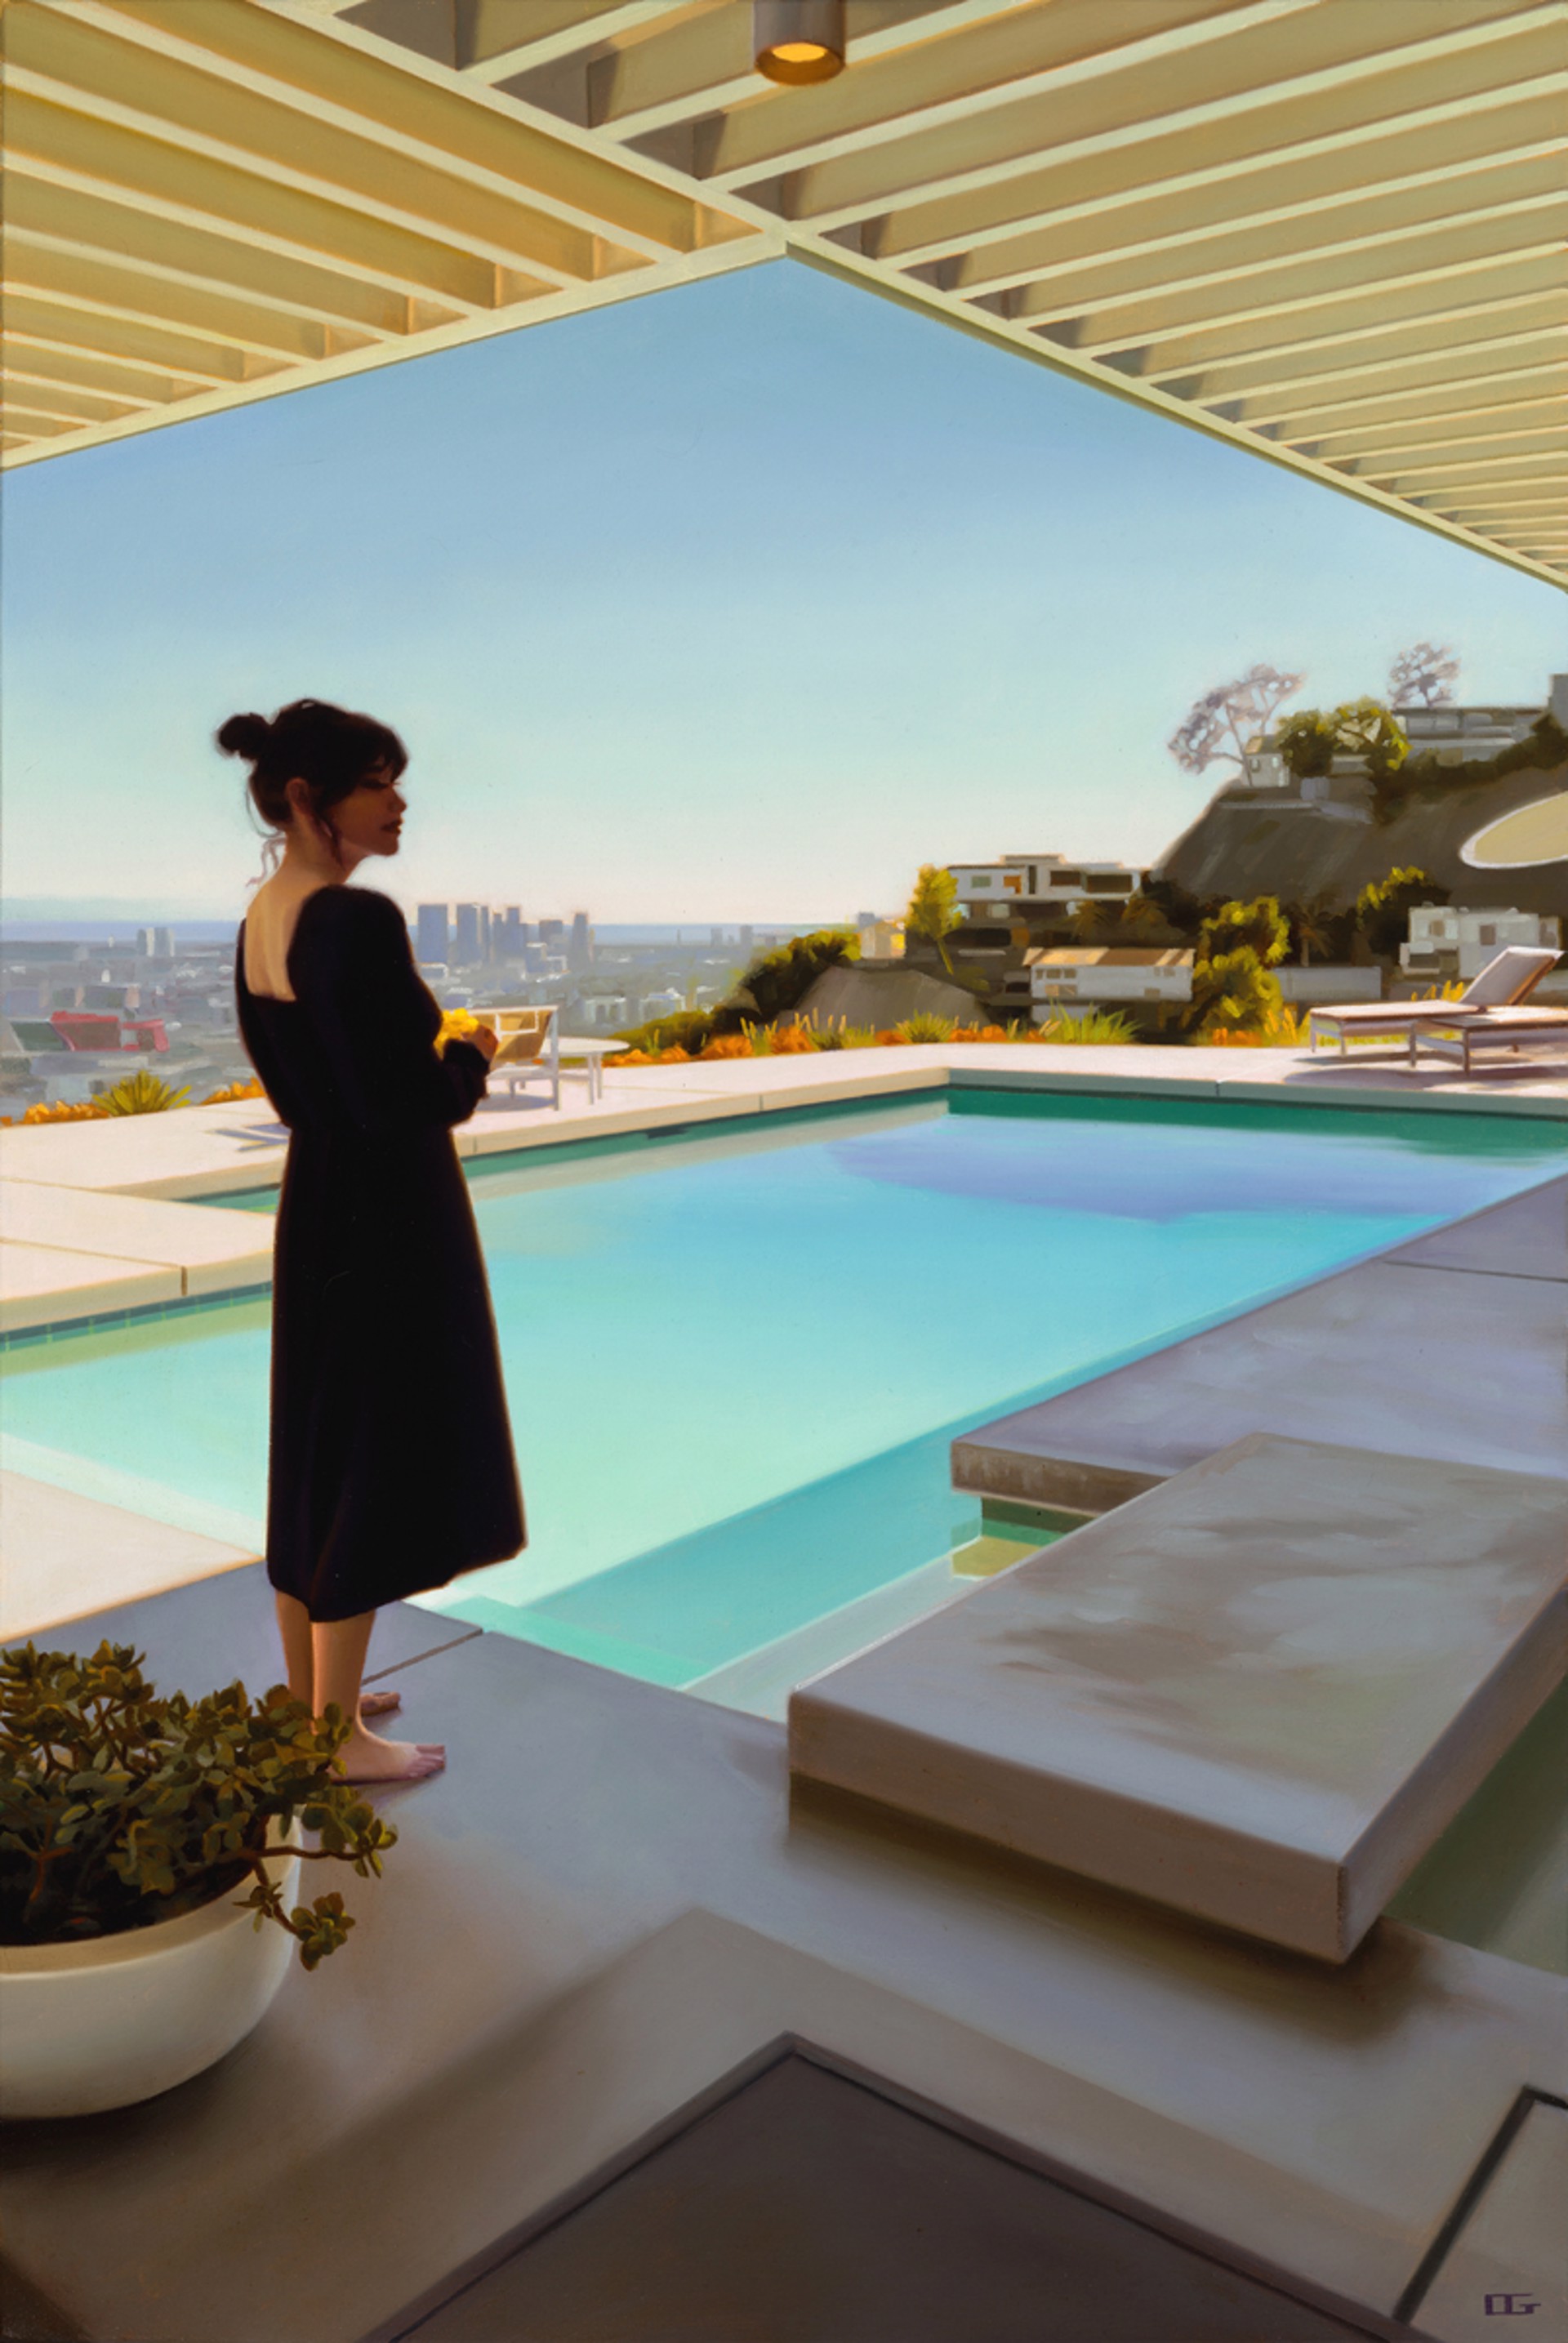 Solace on the Hill by Carrie Graber